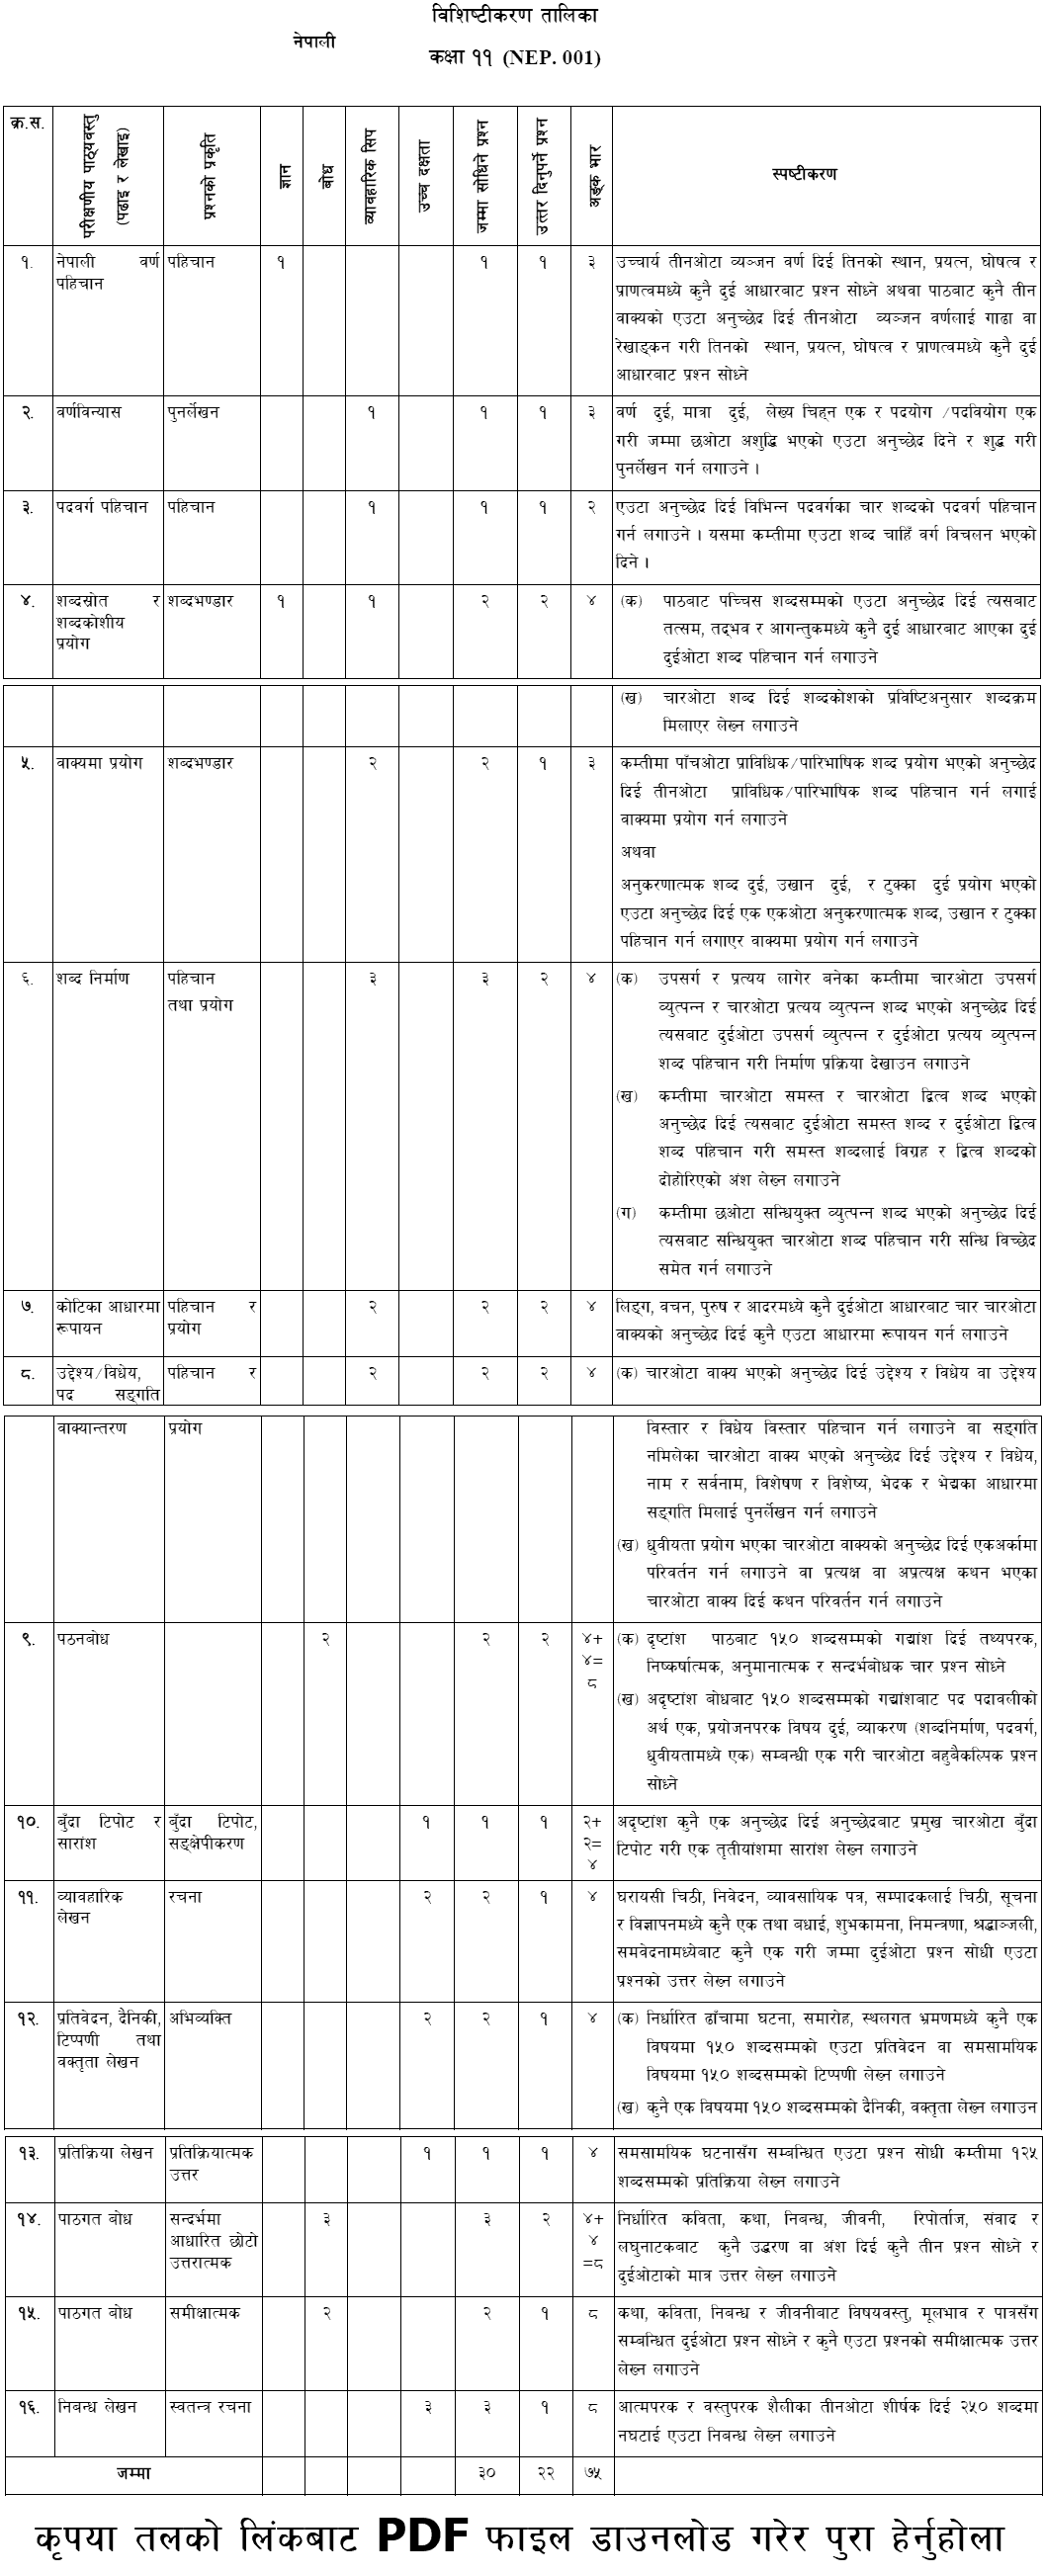 Class 11 and 12 Sample Questions and Specification Grid